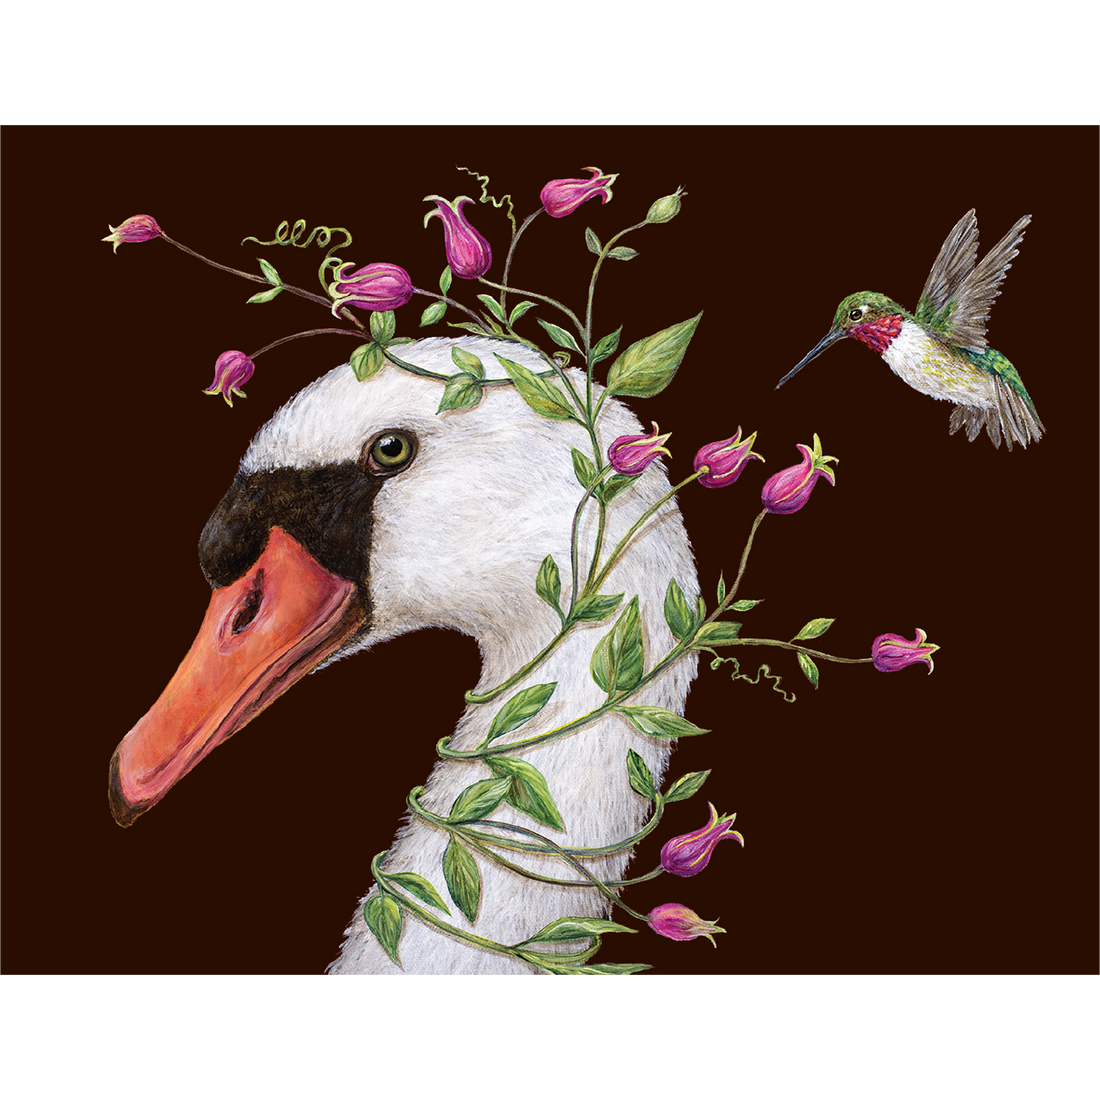 An artwork featuring a beautiful swan adorned with flowers on its head and accompanied by a graceful hummingbird, the Iris and Stanley Card by Hester &amp; Cook.